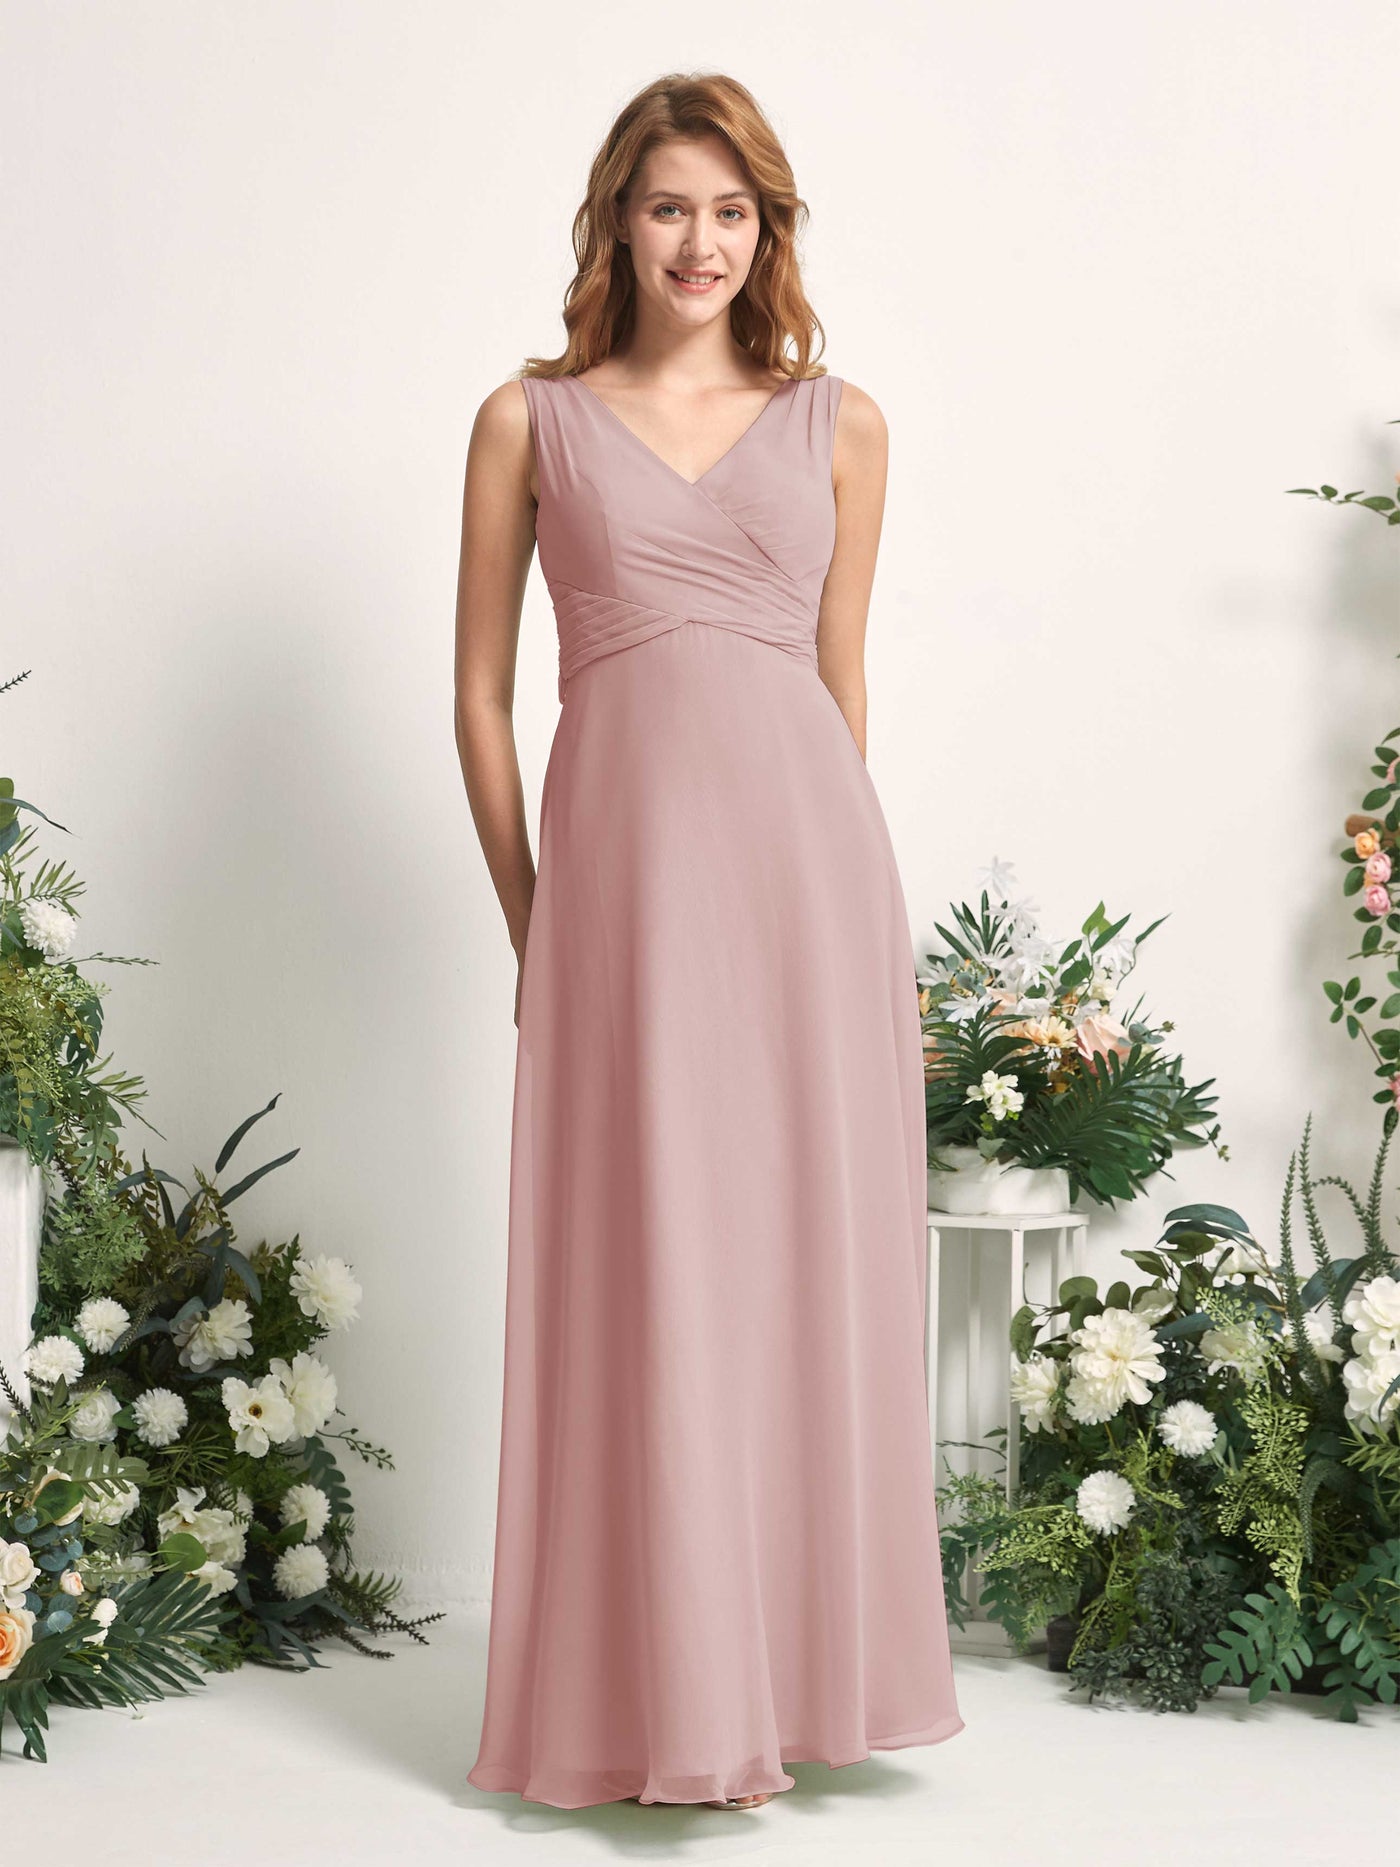 Bridesmaid Dress A-line Chiffon Straps Full Length Sleeveless Wedding Party Dress - Dusty Rose (81227309)#color_dusty-rose